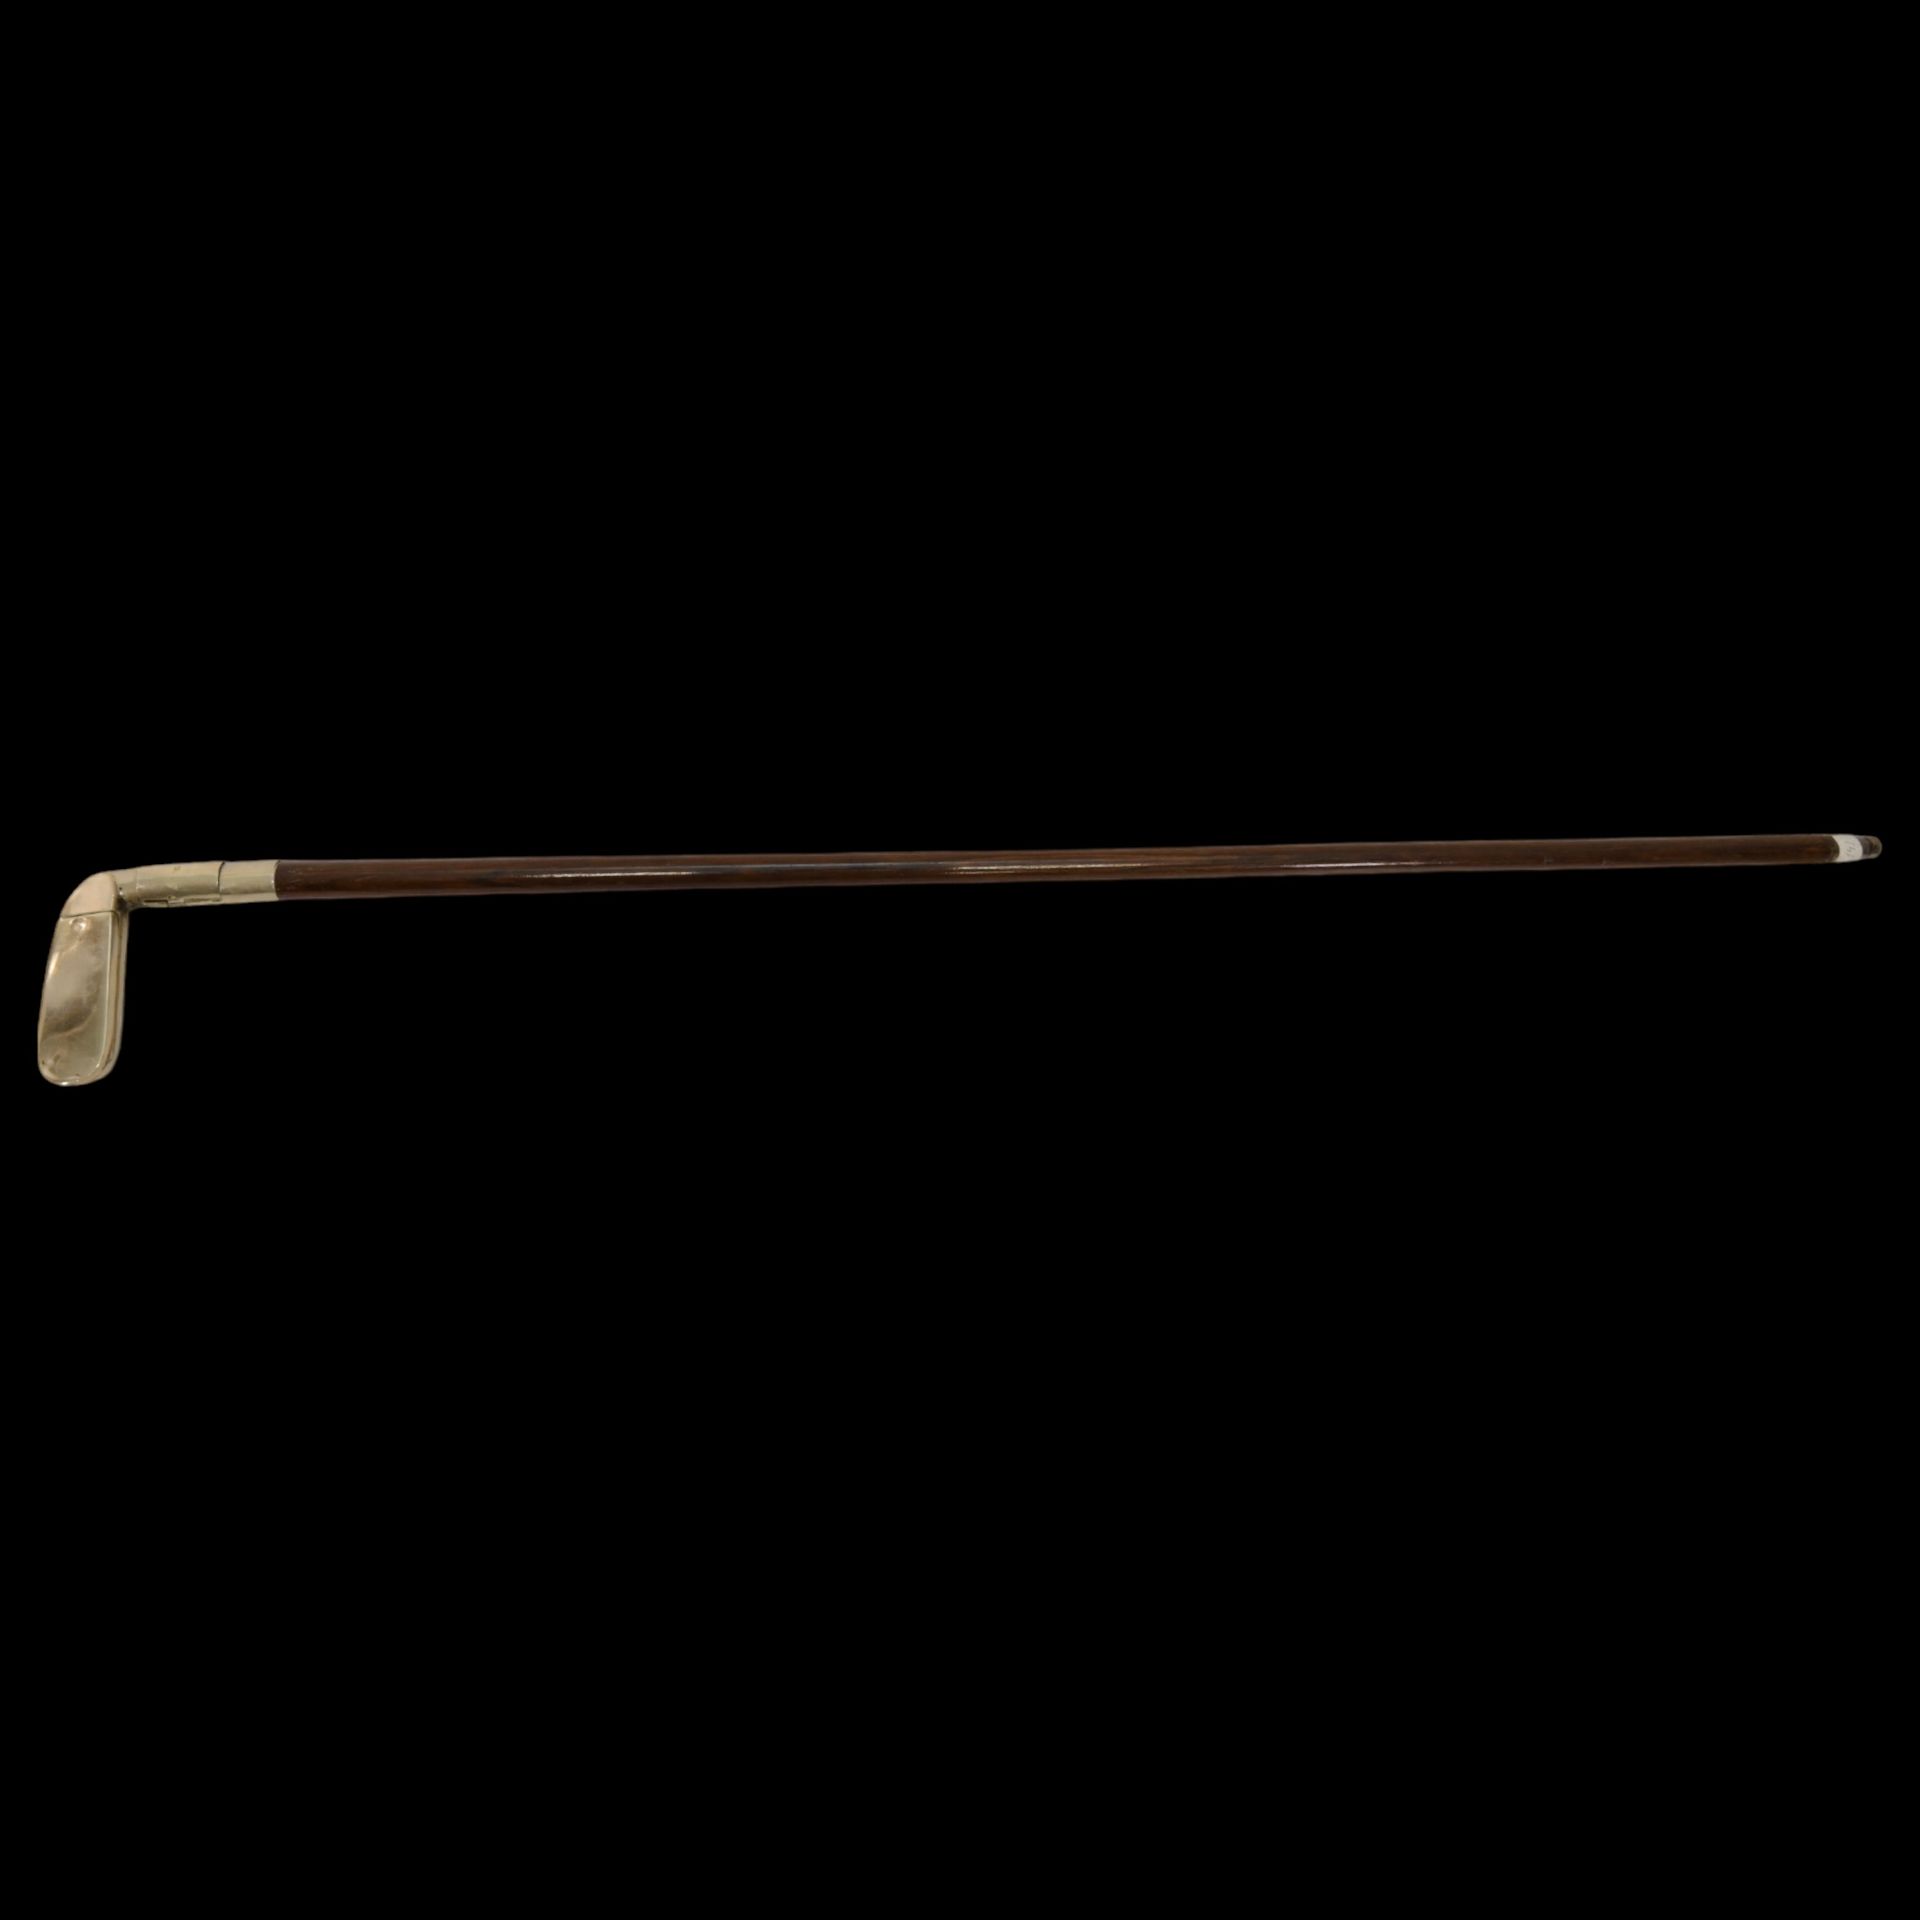 A rare Golfclub Walking Stick Cane, Cigarette Case with Match Safe, early 20th century. - Image 2 of 8